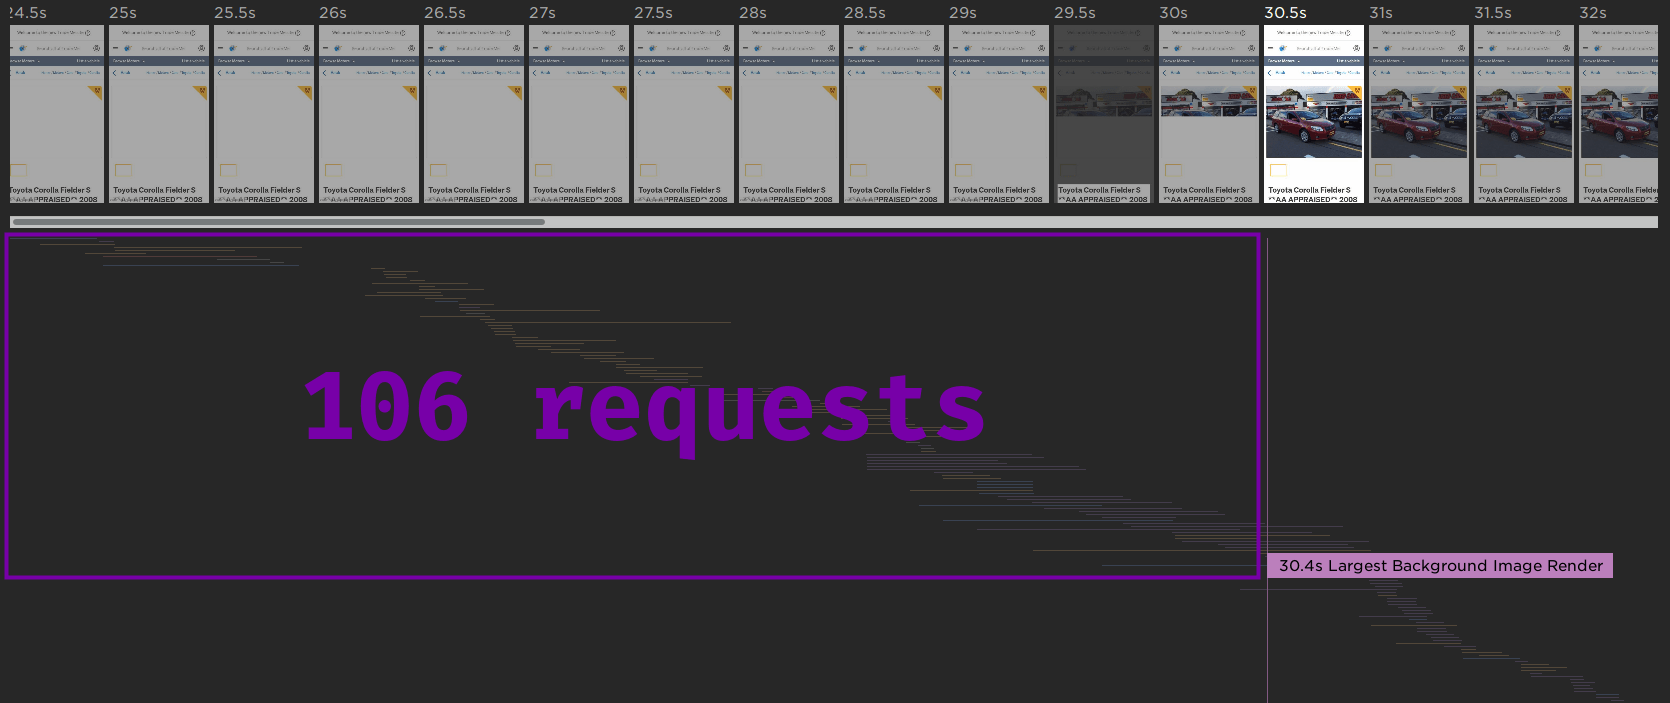 Waterfall chart showing the number of requests before the primary image is rendered